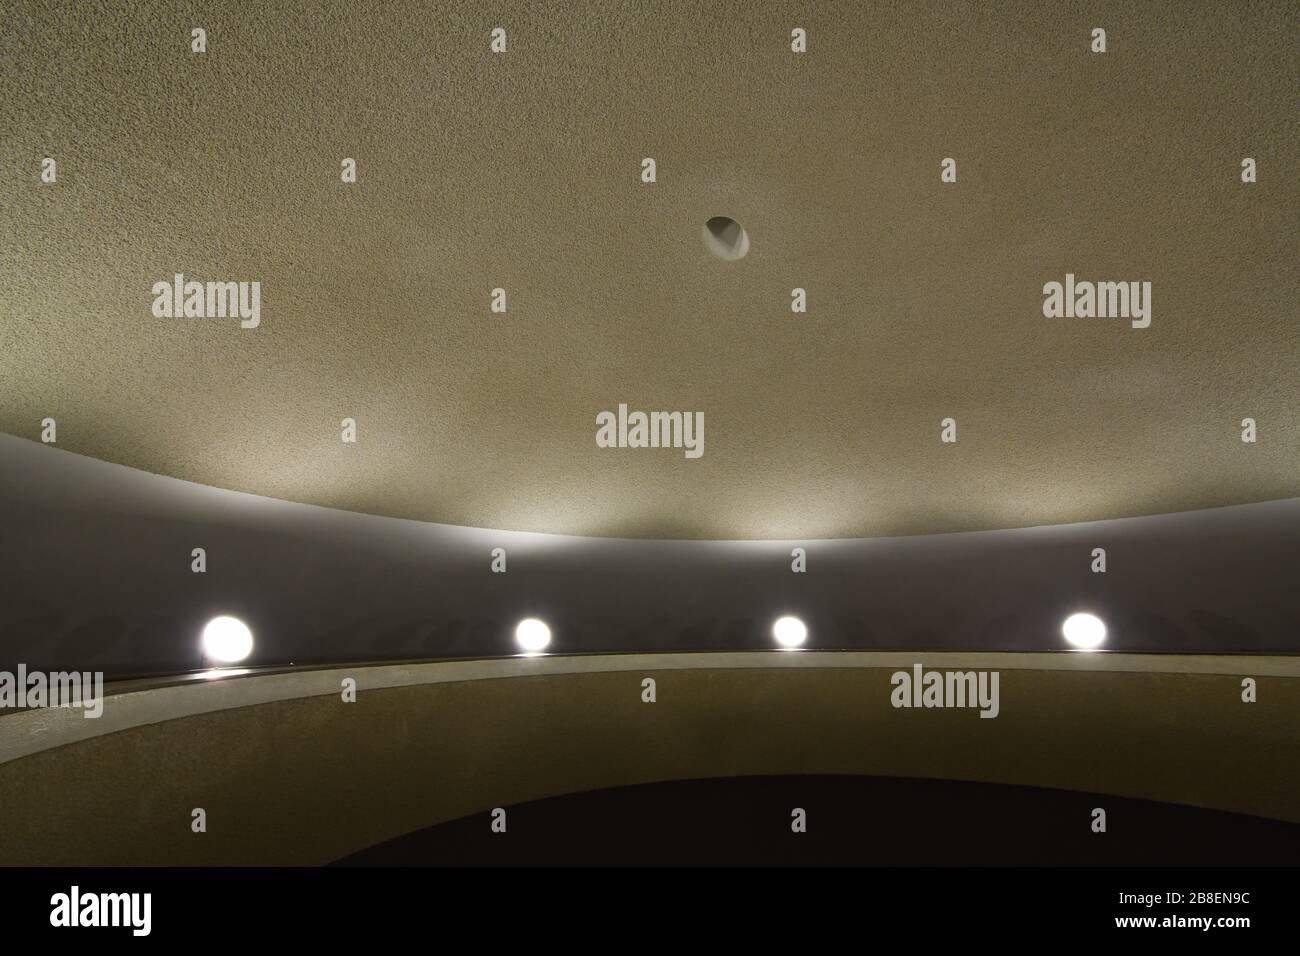 Aesthetic Ceiling Dome Top Interior Of The Voortrekker Monument Stock Photo